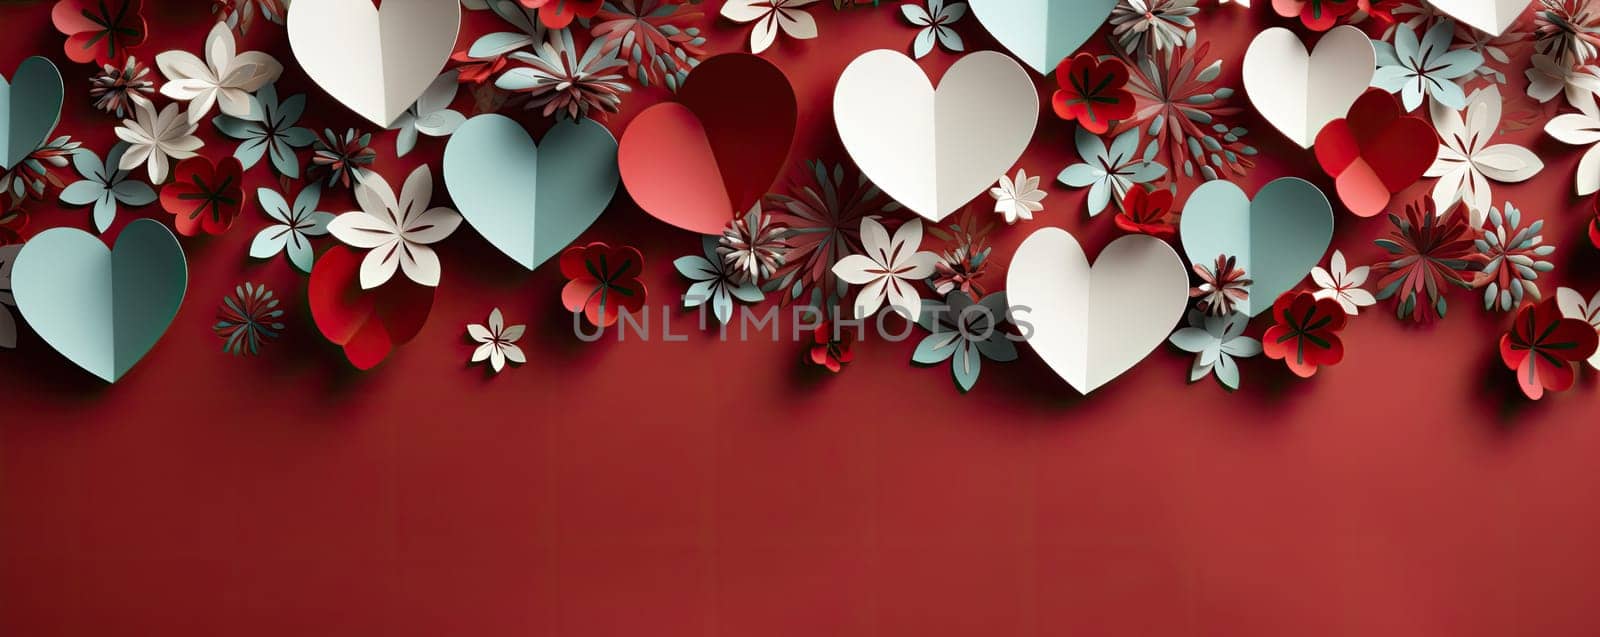 Red and white hearts on red background, romantic admiration by Yurich32